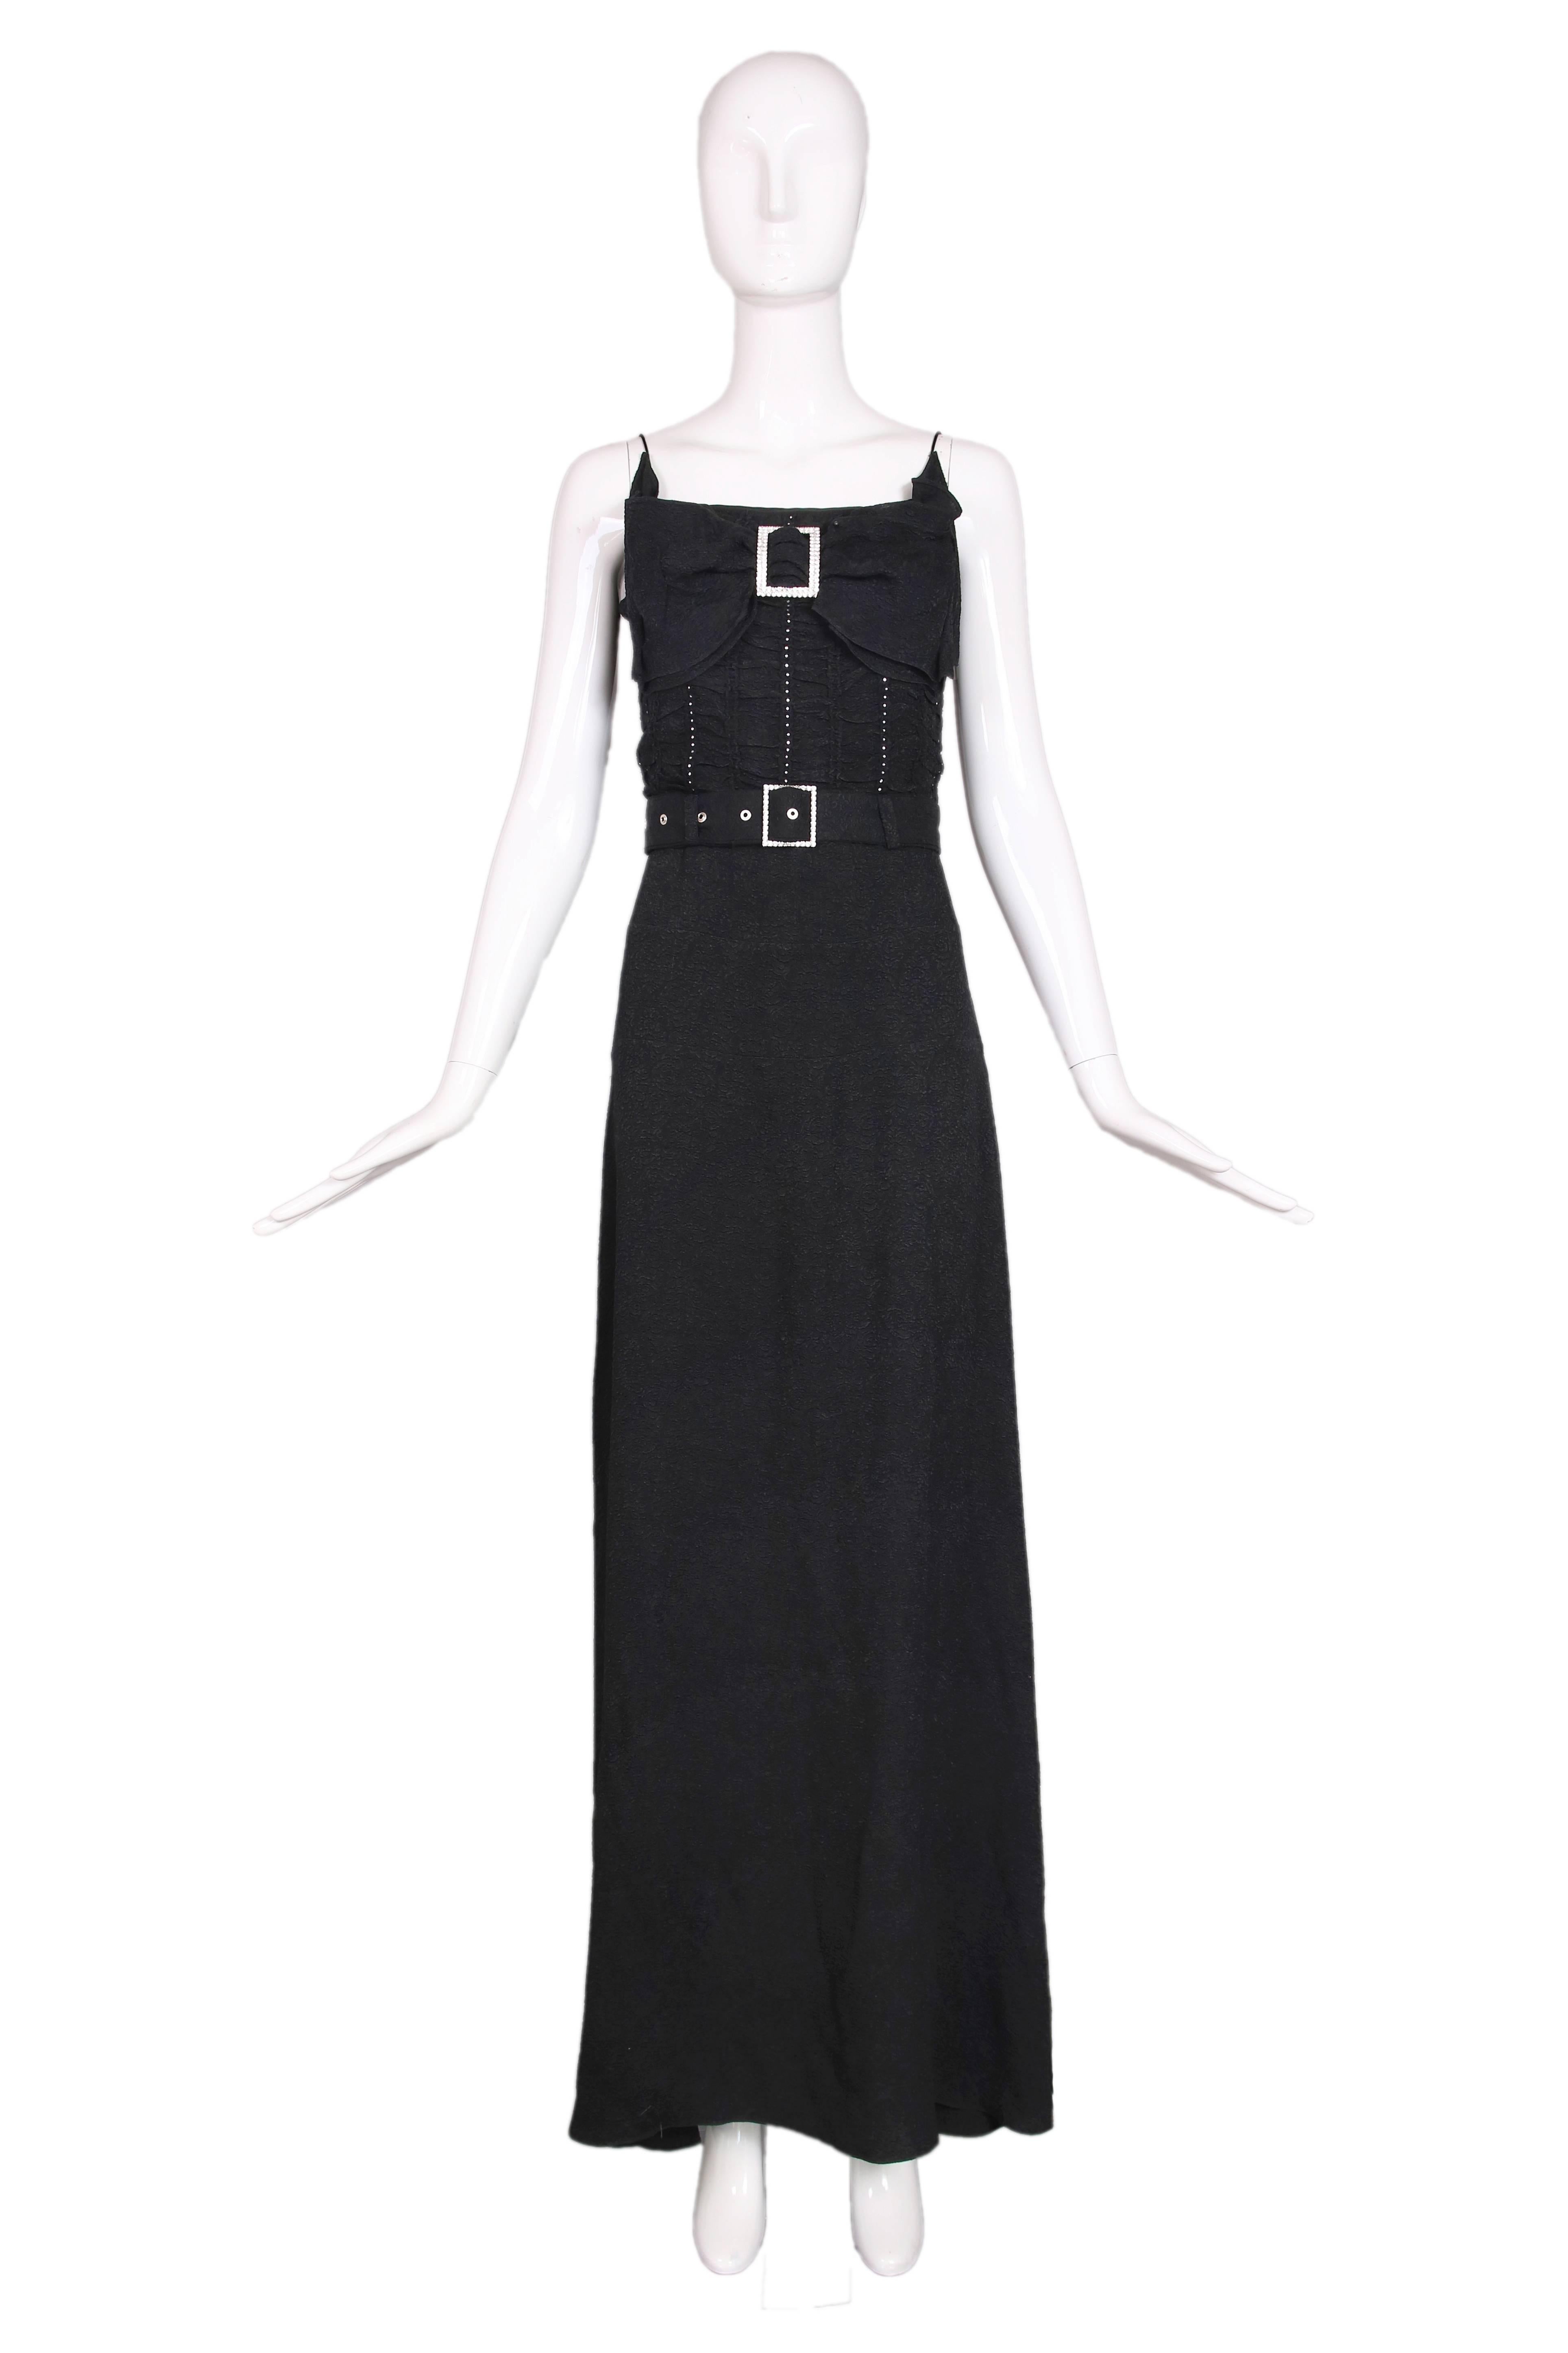 John Galliano black rayon puckered crepe evening dress w/frontal decorative bow at the chest and rhinestone detail that goes down the bodice. Rhinestone buckle detail at bow and waist belt. Fully lined in silk. In excellent condition. Size US